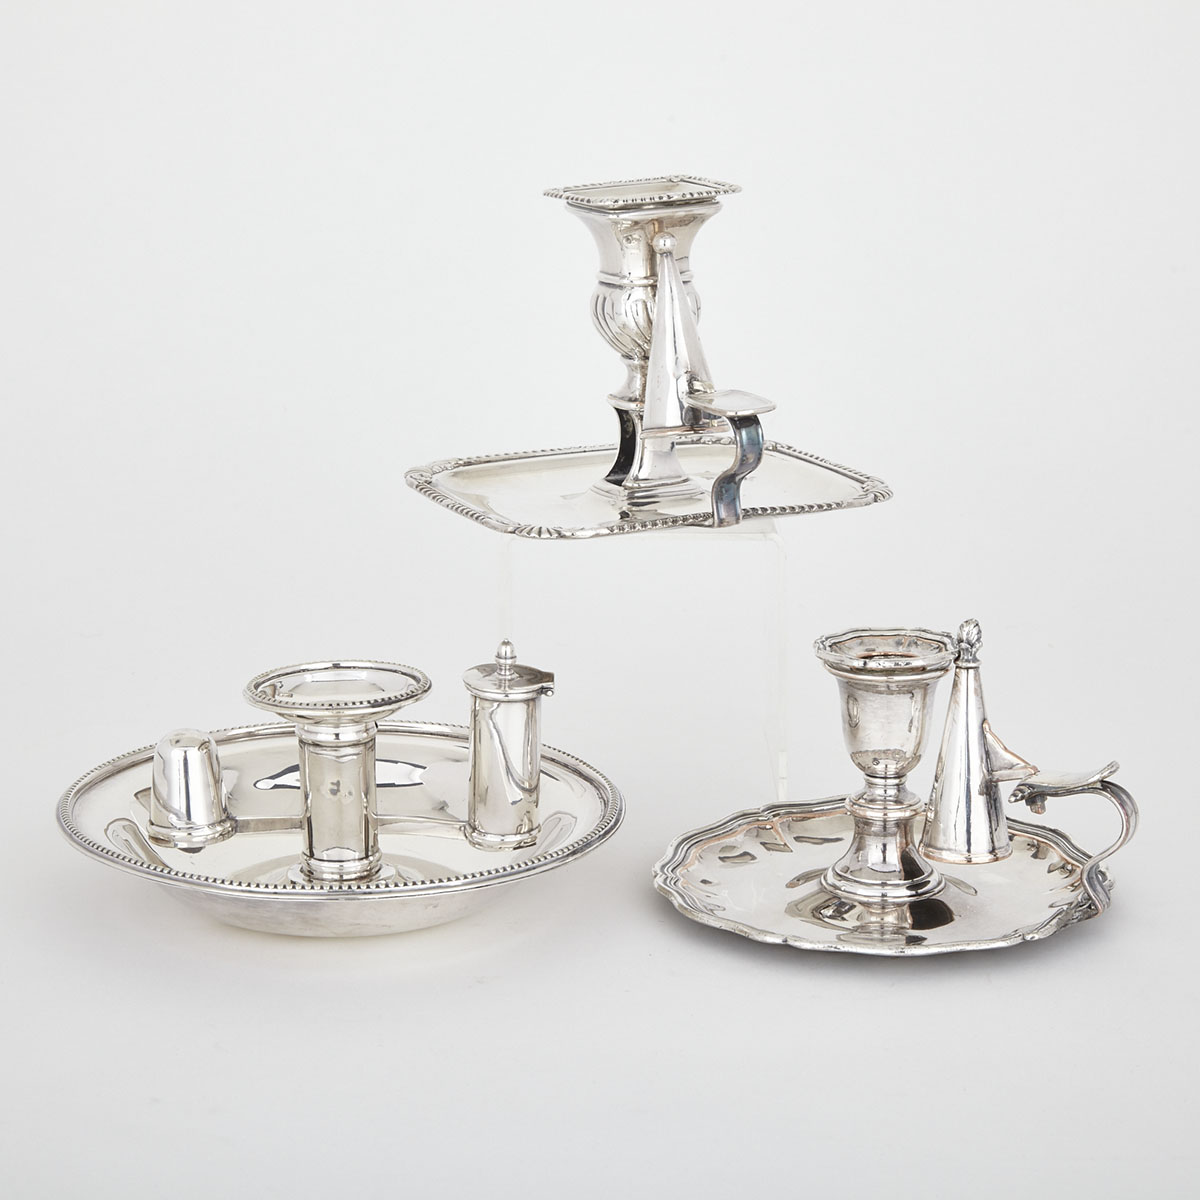 Three Old Sheffield and Edwardian Silver Plated  Chambersticks, 19th/20th century